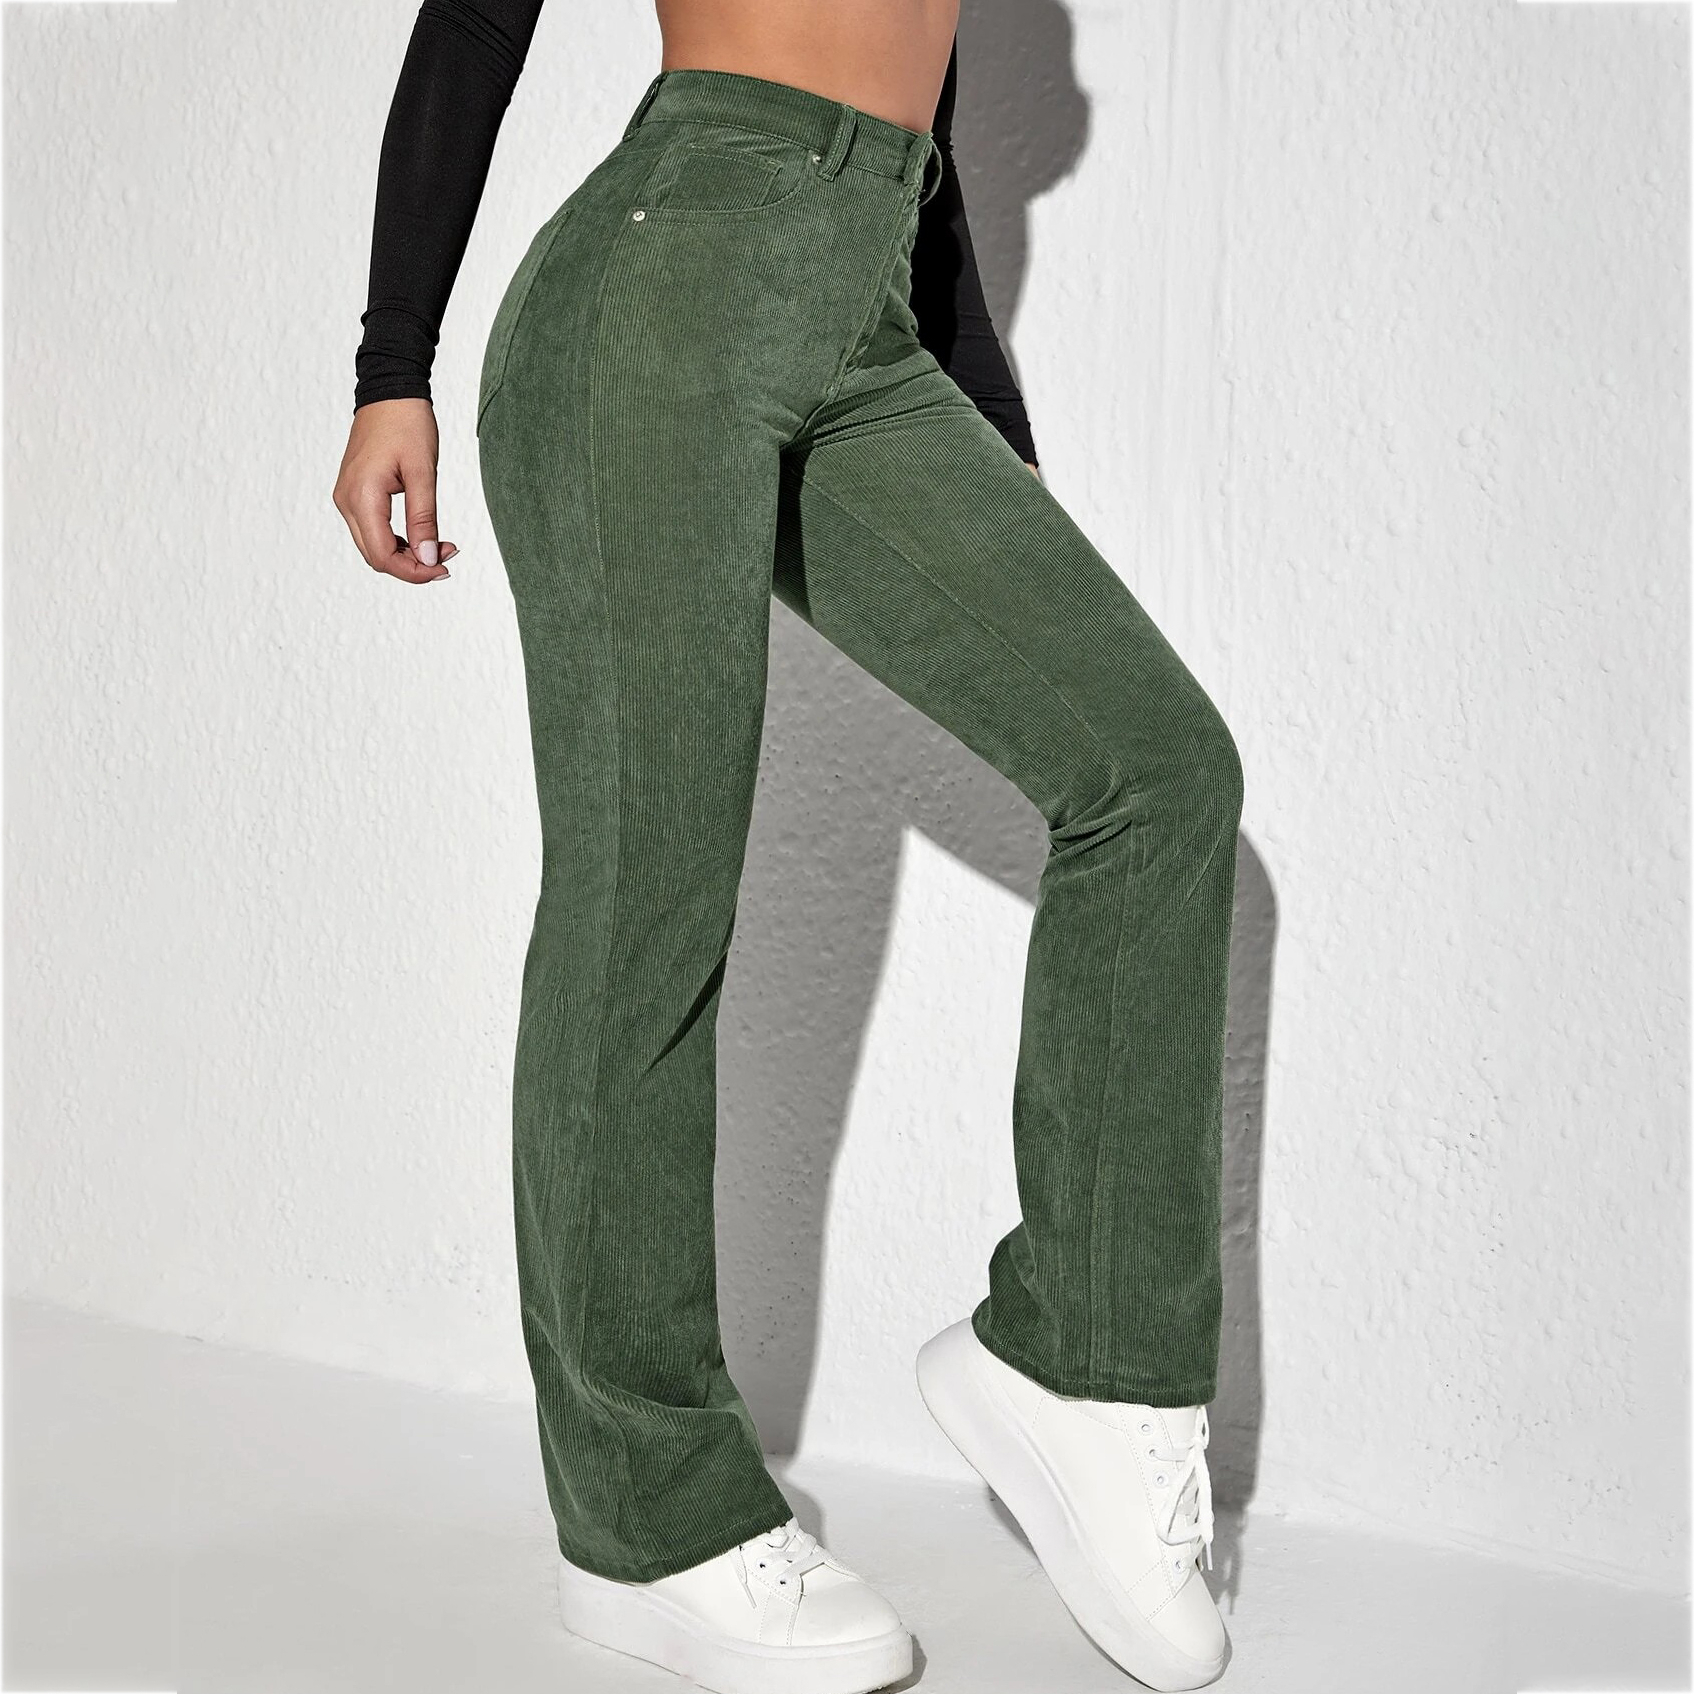 Letter Patched Flare Leg Corduroy Pants - Green, S